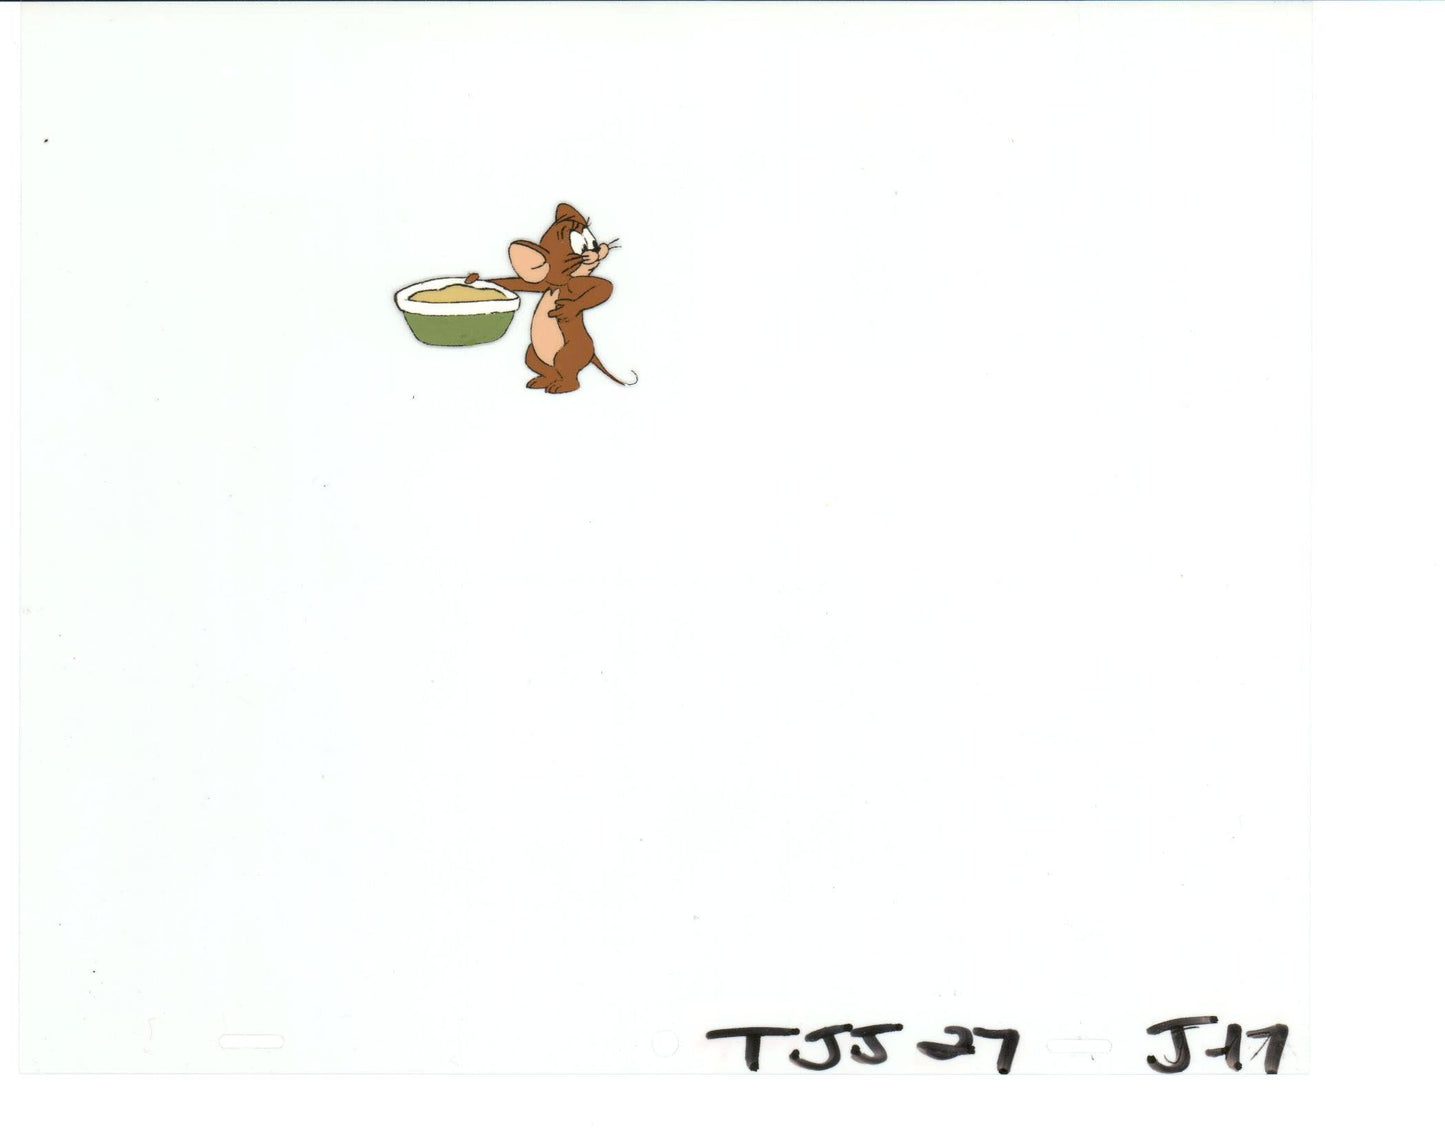 Tom & Jerry Original Production Animation Cel from Filmation 1980-82 b4548